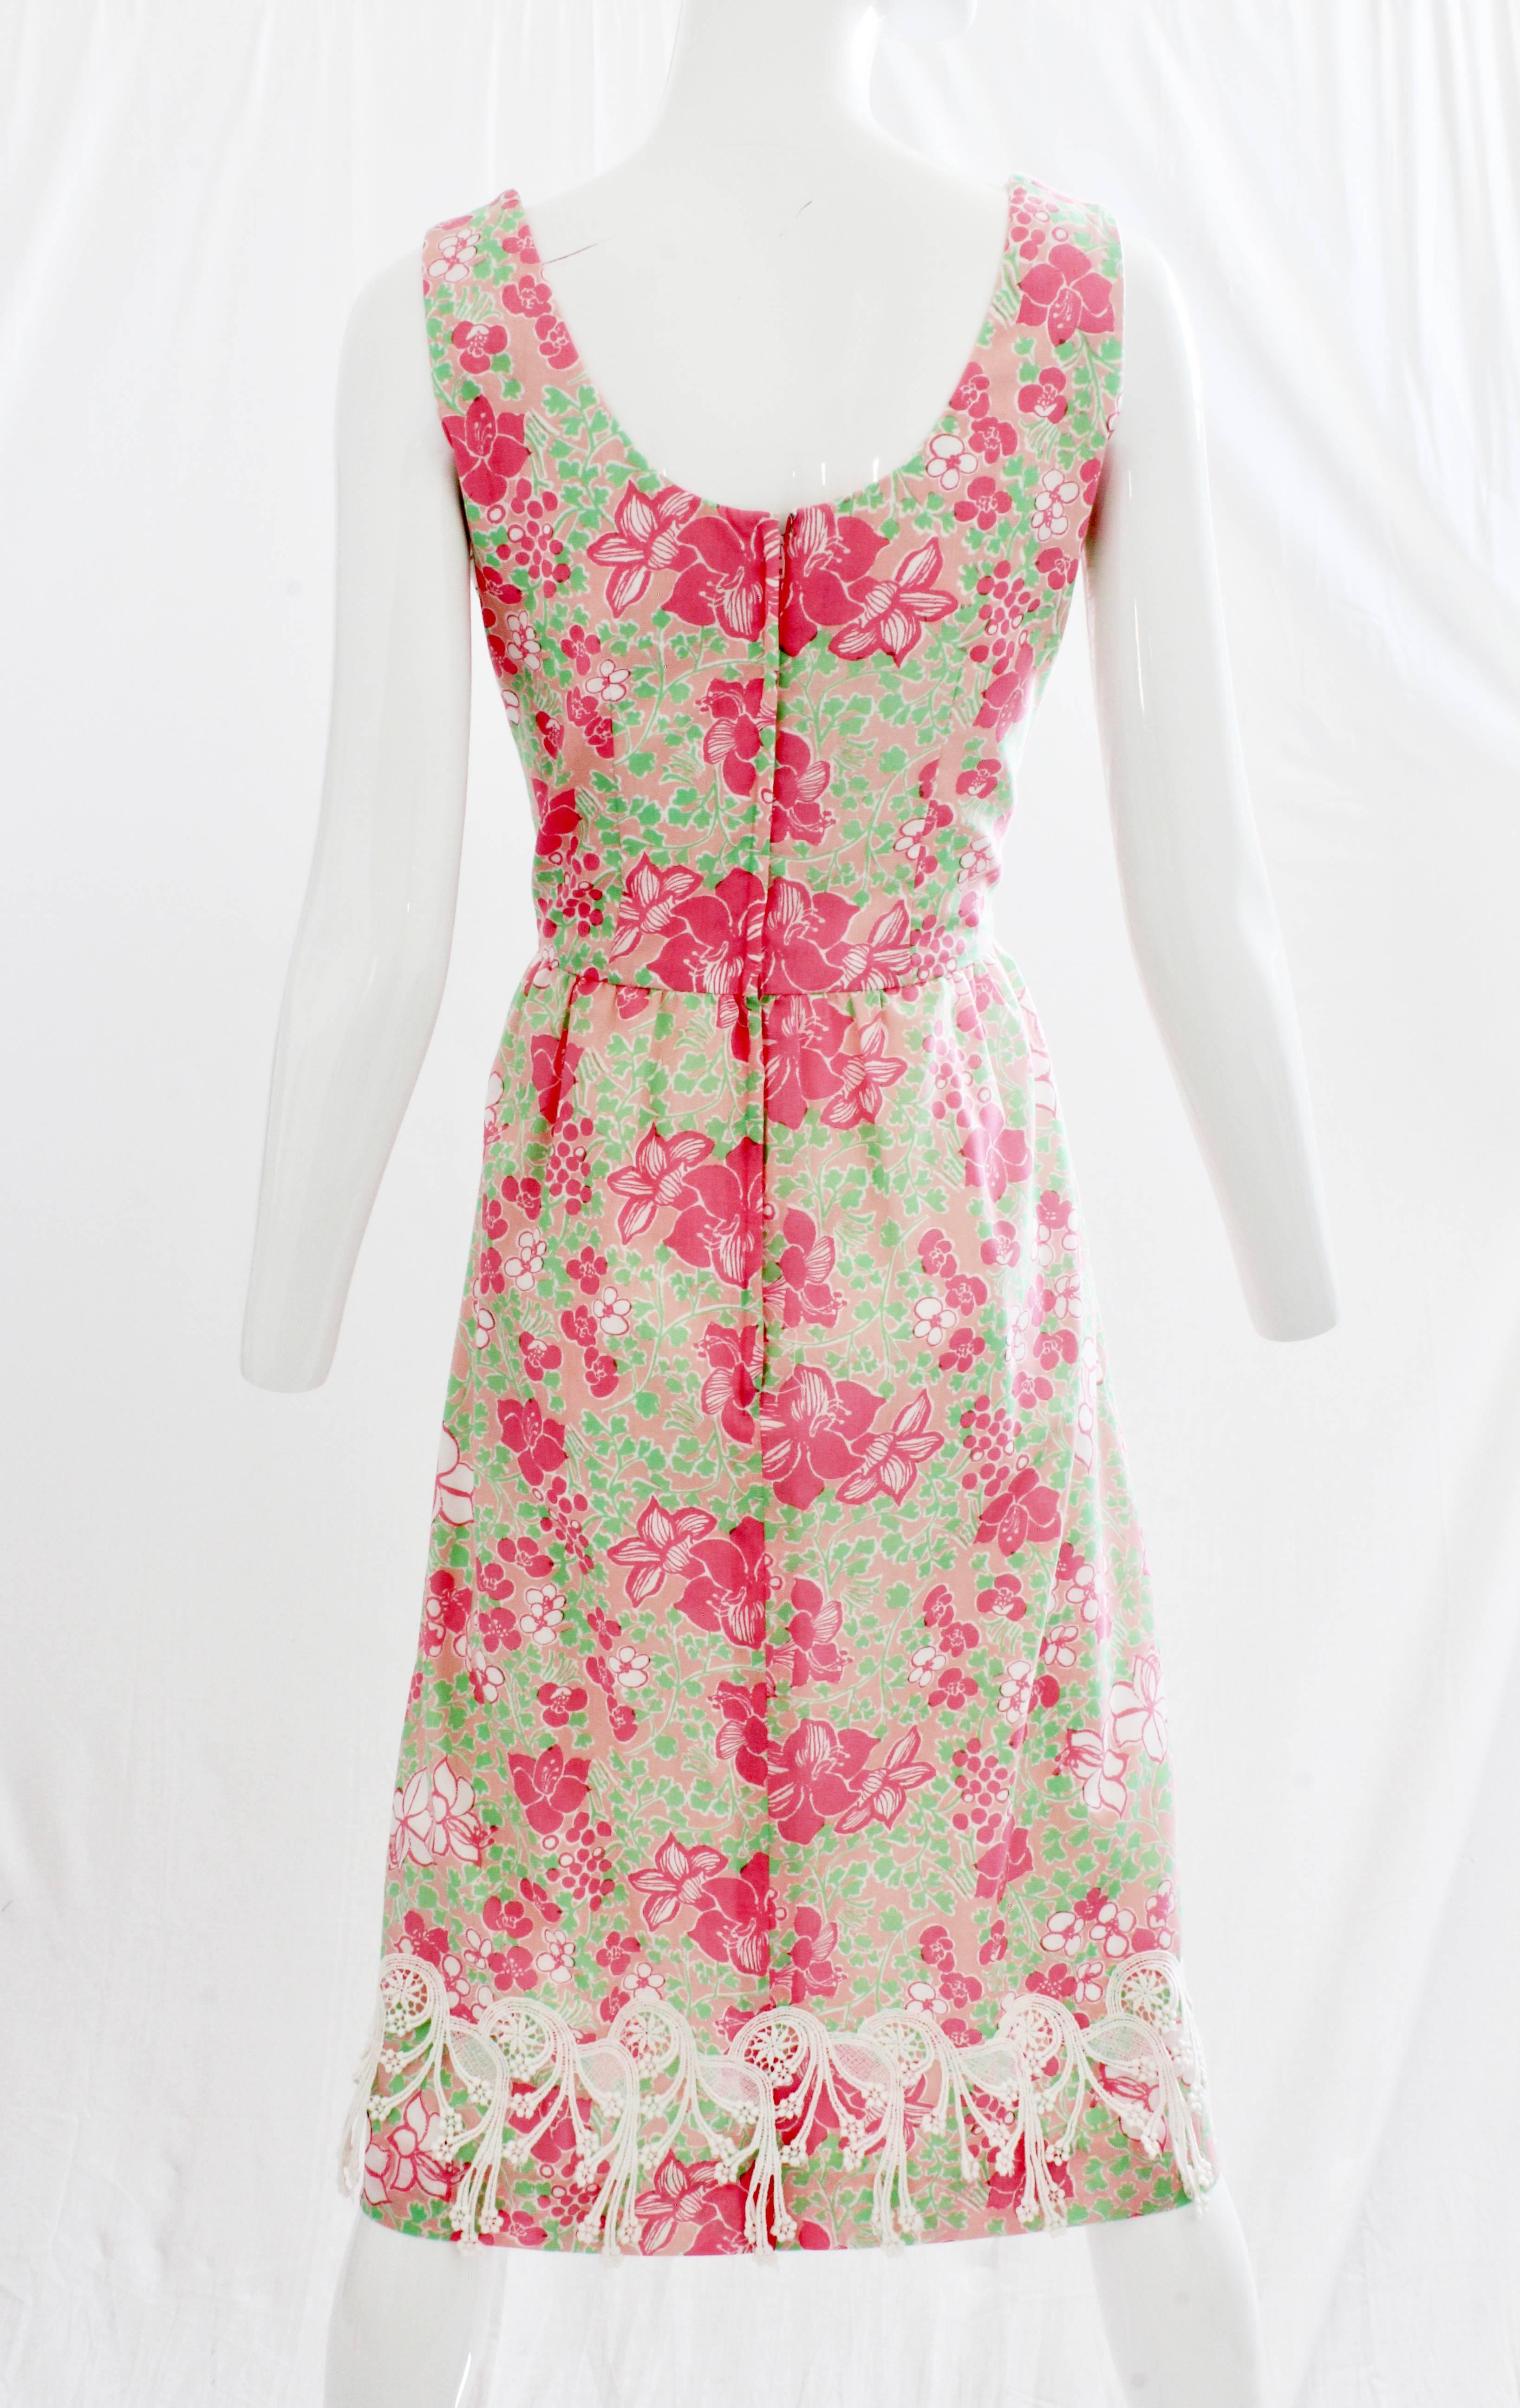 Lilly Pulitzer Dress The Lilly Bold Florals White Lace Trim Rare Vintage 1970s For Sale 1